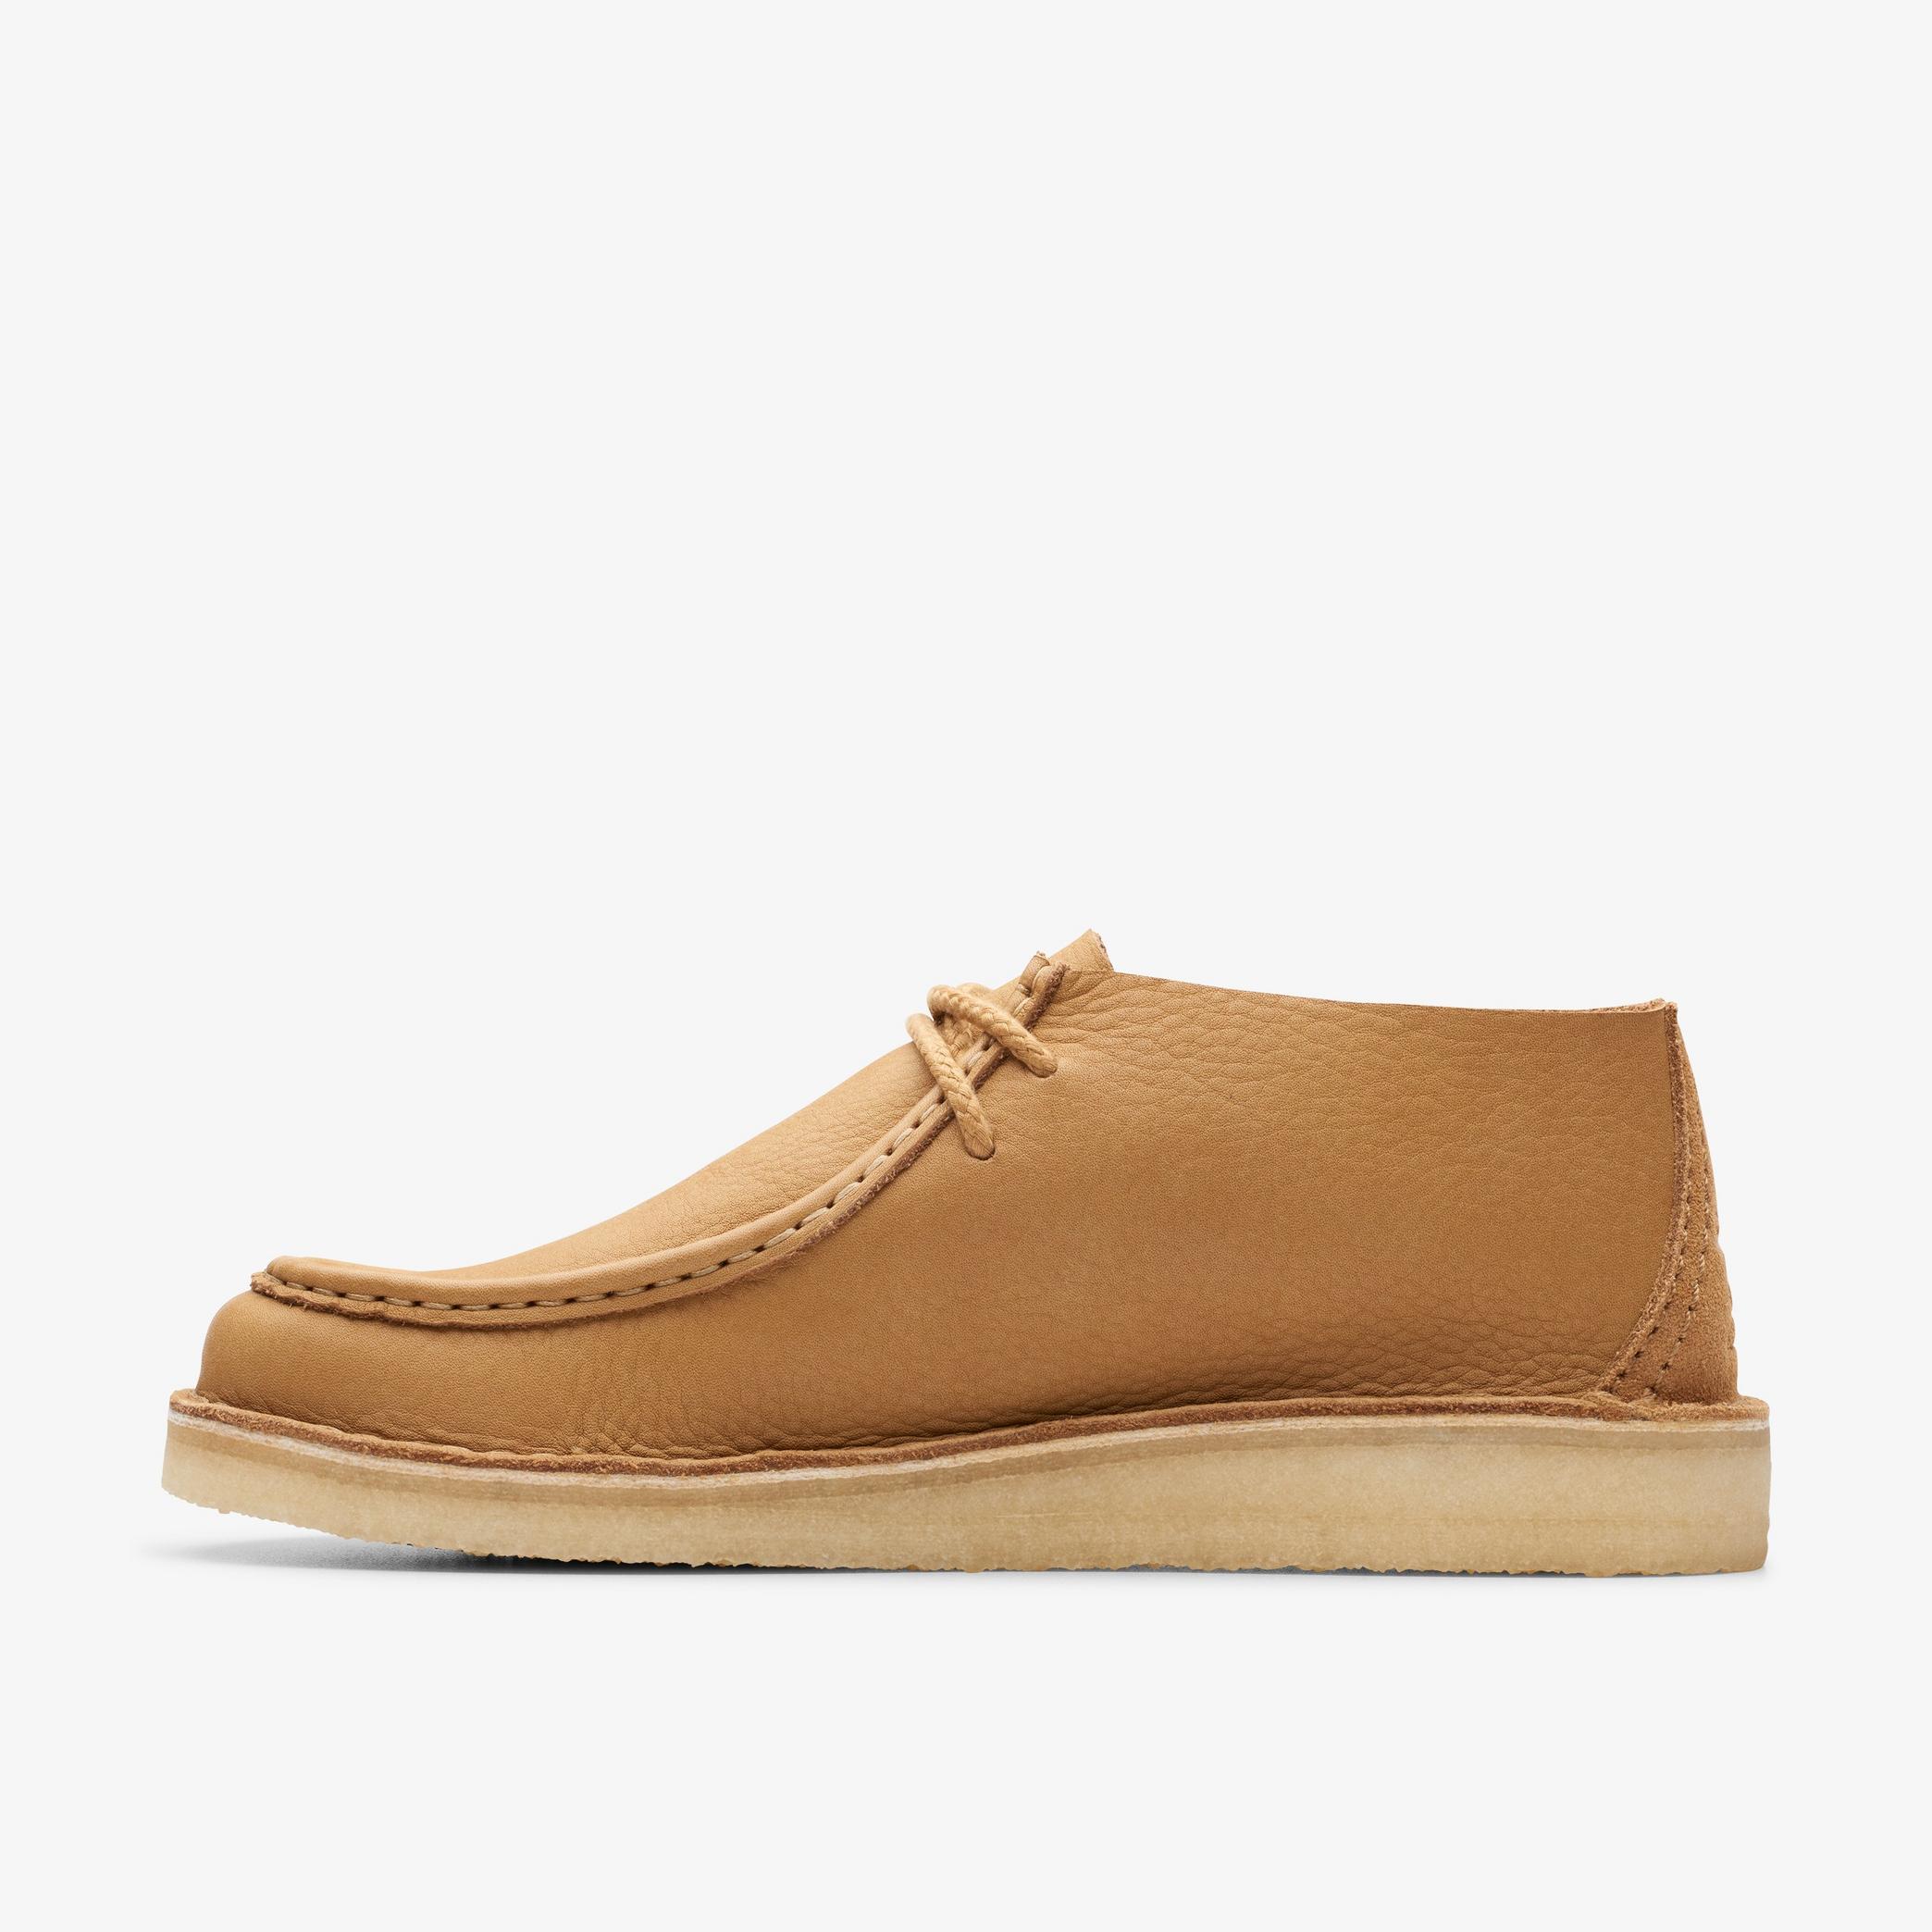 Desert Nomad Mid Tan Leather Moccasins, view 2 of 6